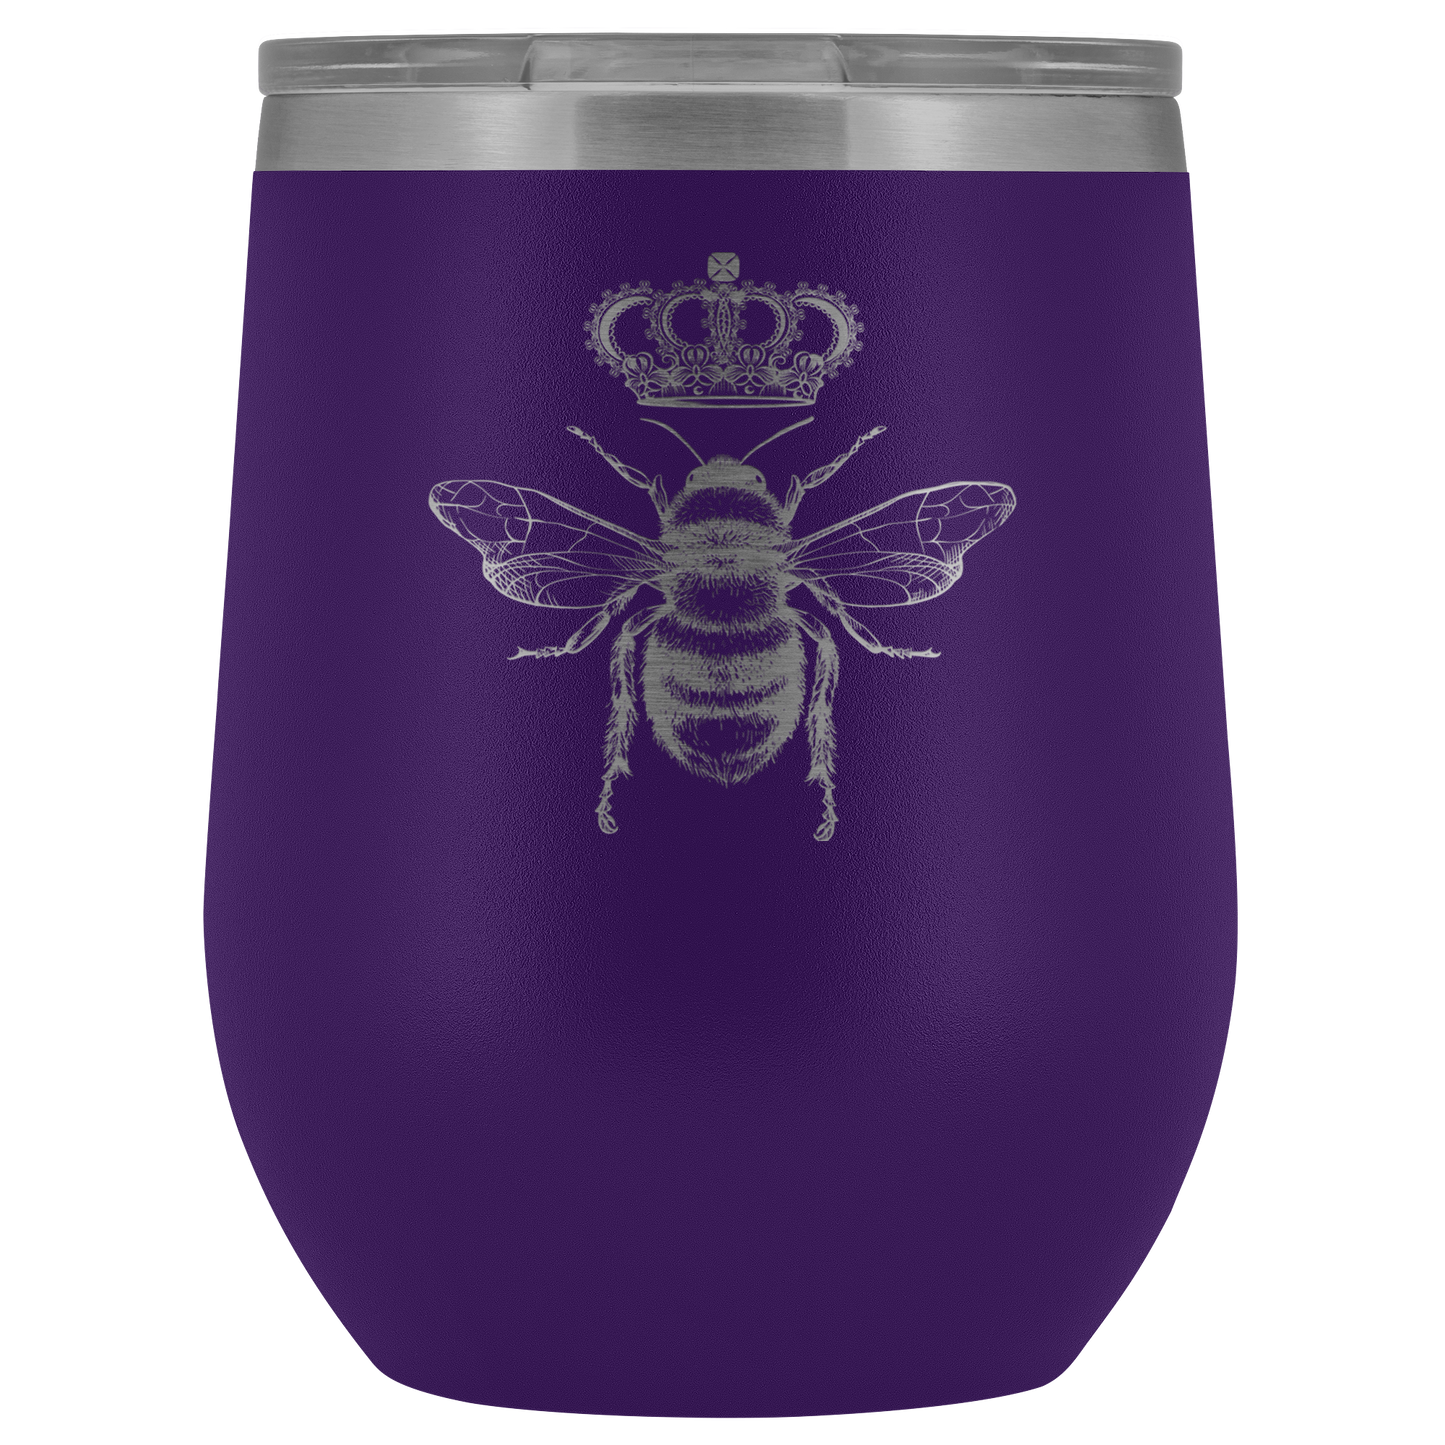 QB CLASSY QUEEN BEE LIMITED EDITION WINE TUMBLER